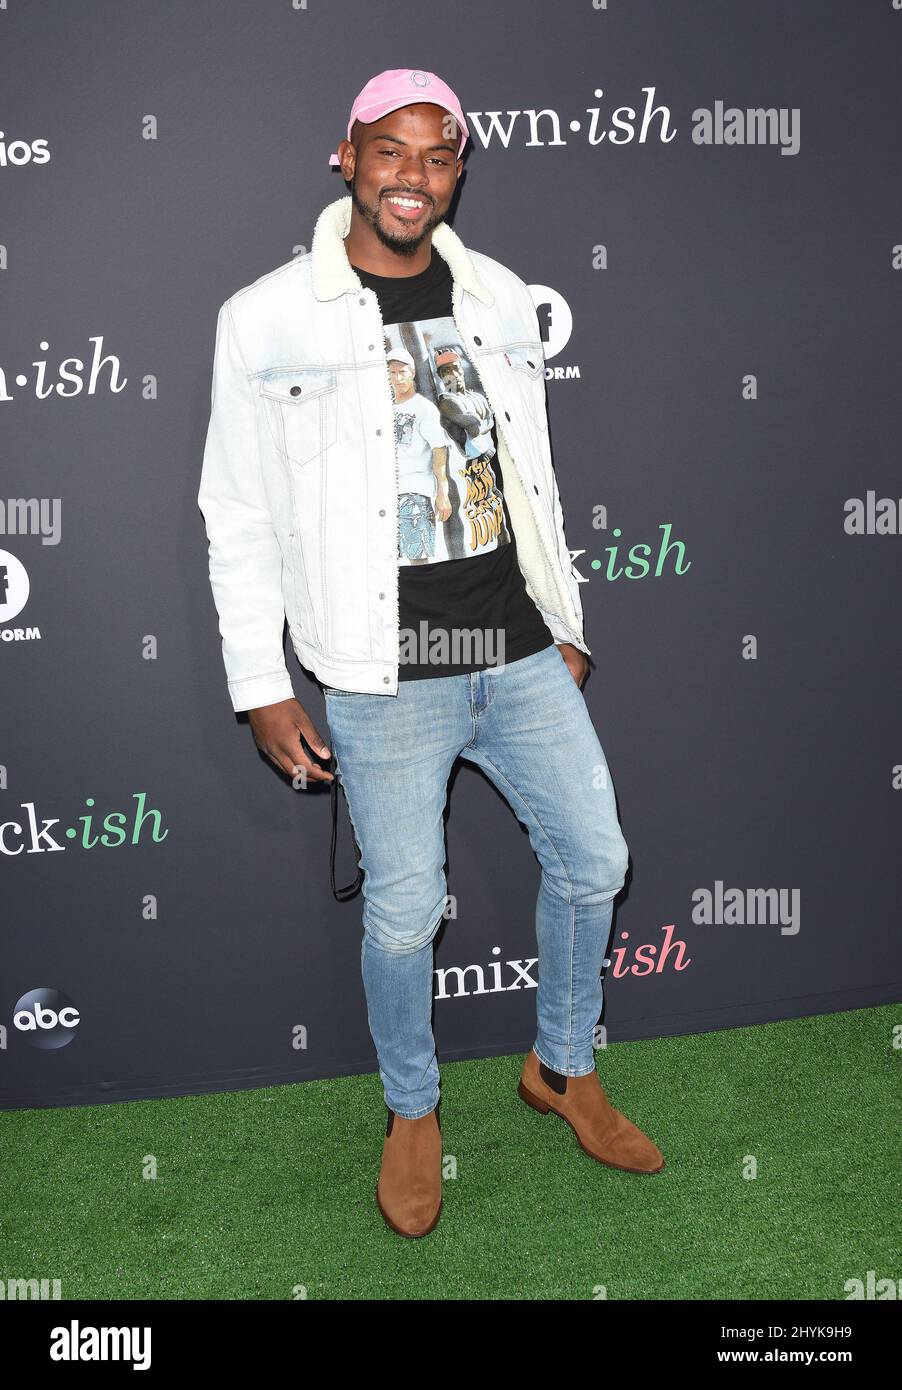 Trevor Jackson arriving to the ABC 'Embrace Your Ish' Event at Goya Studios on Sep 17, 2019 in Hollywood, CA. Stock Photo